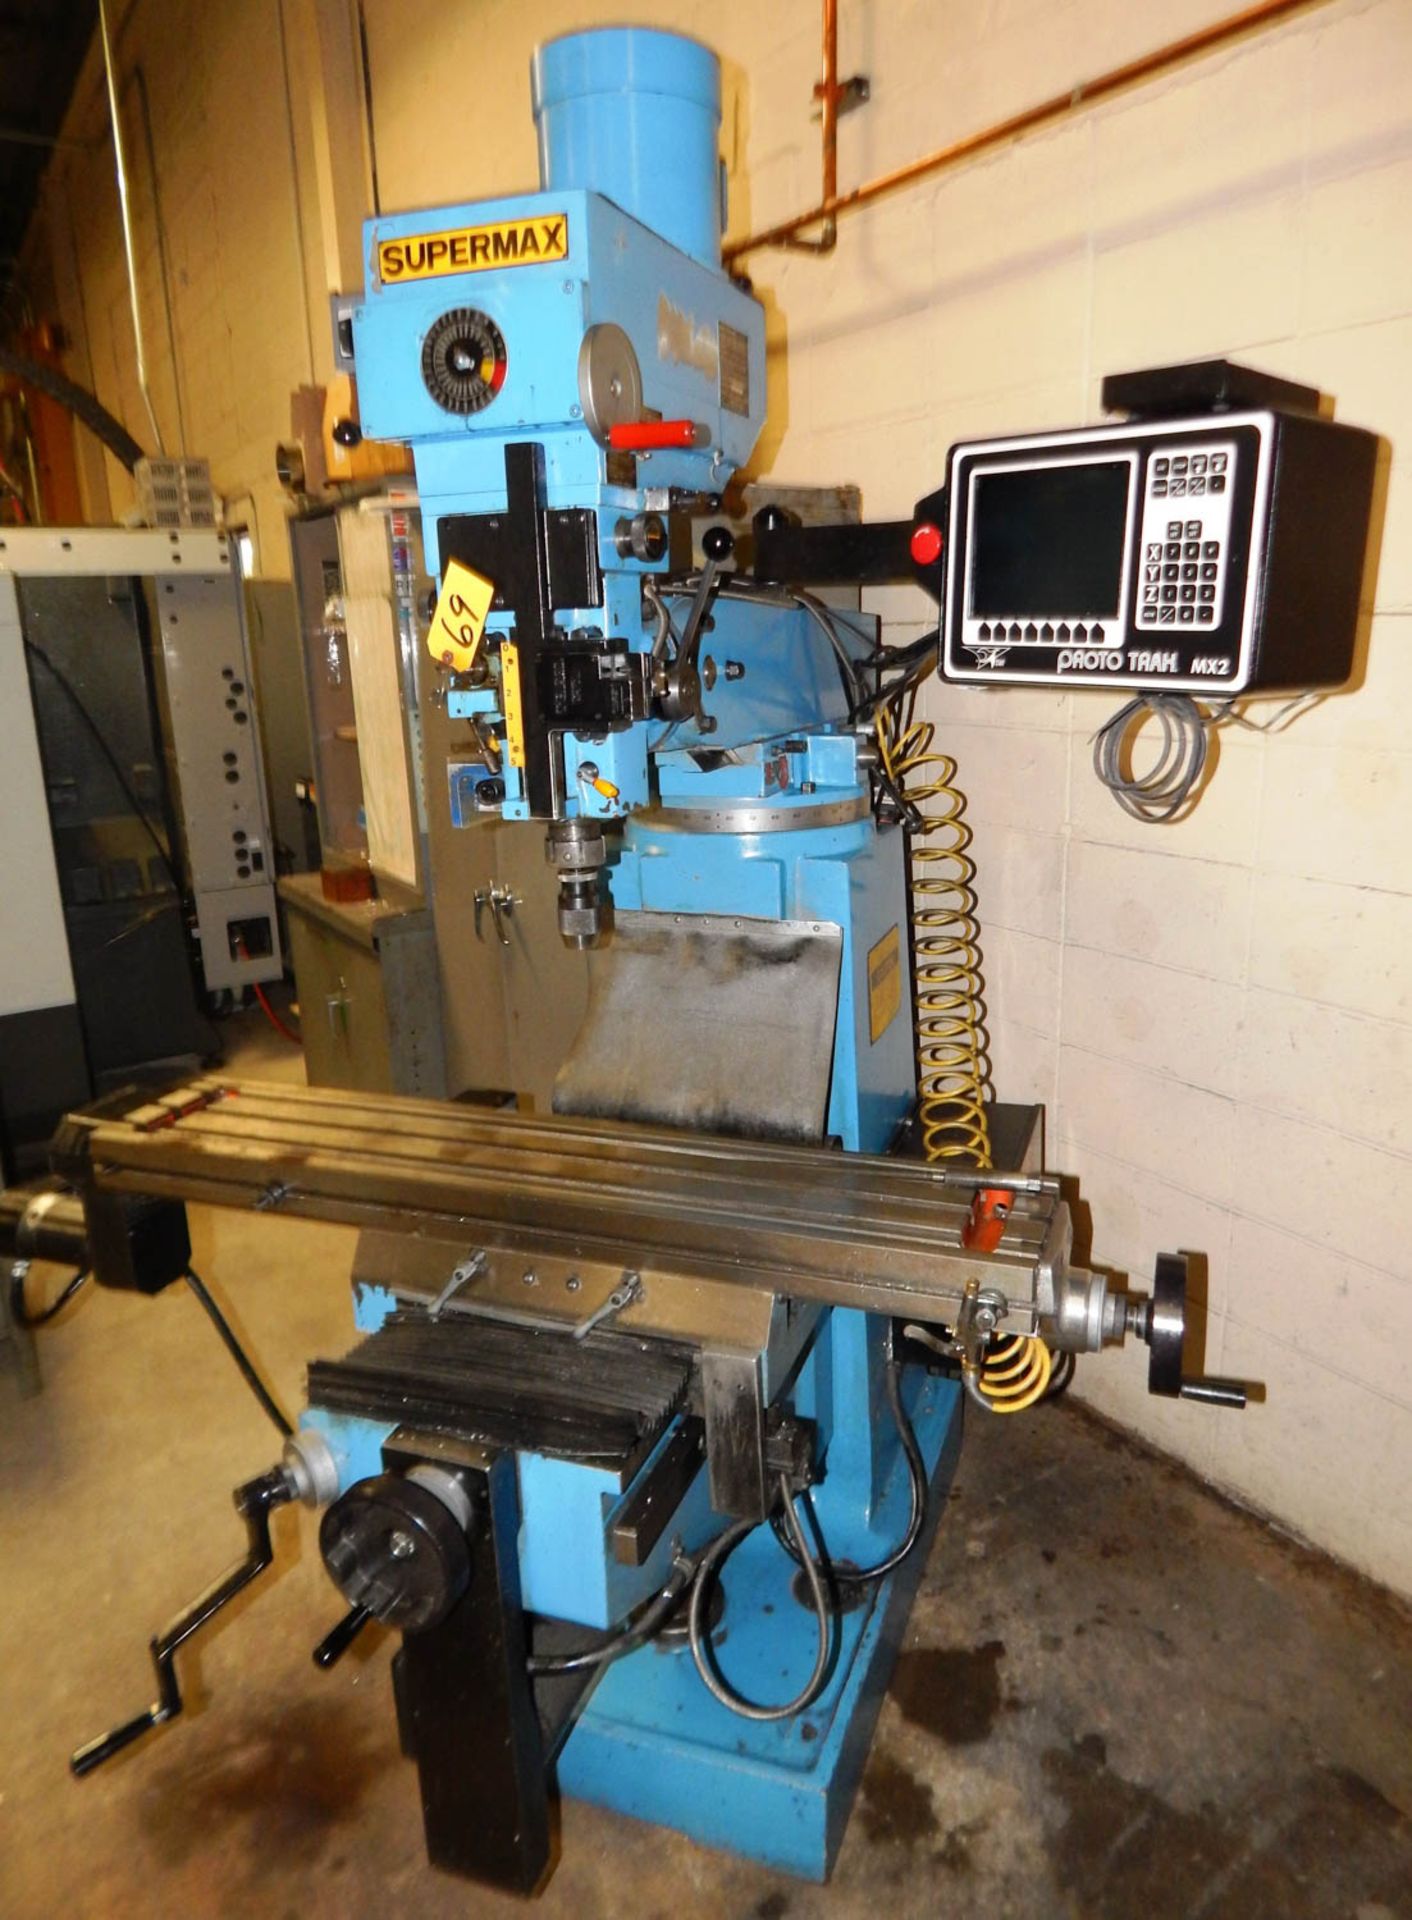 SUPER MAX MDL YCM-16VS CNC KNEE-TYPE MILLING MACHINE WITH PROTOTRAK MX-2 CONTROL, 2-AXIS, 9'' X - Image 2 of 3